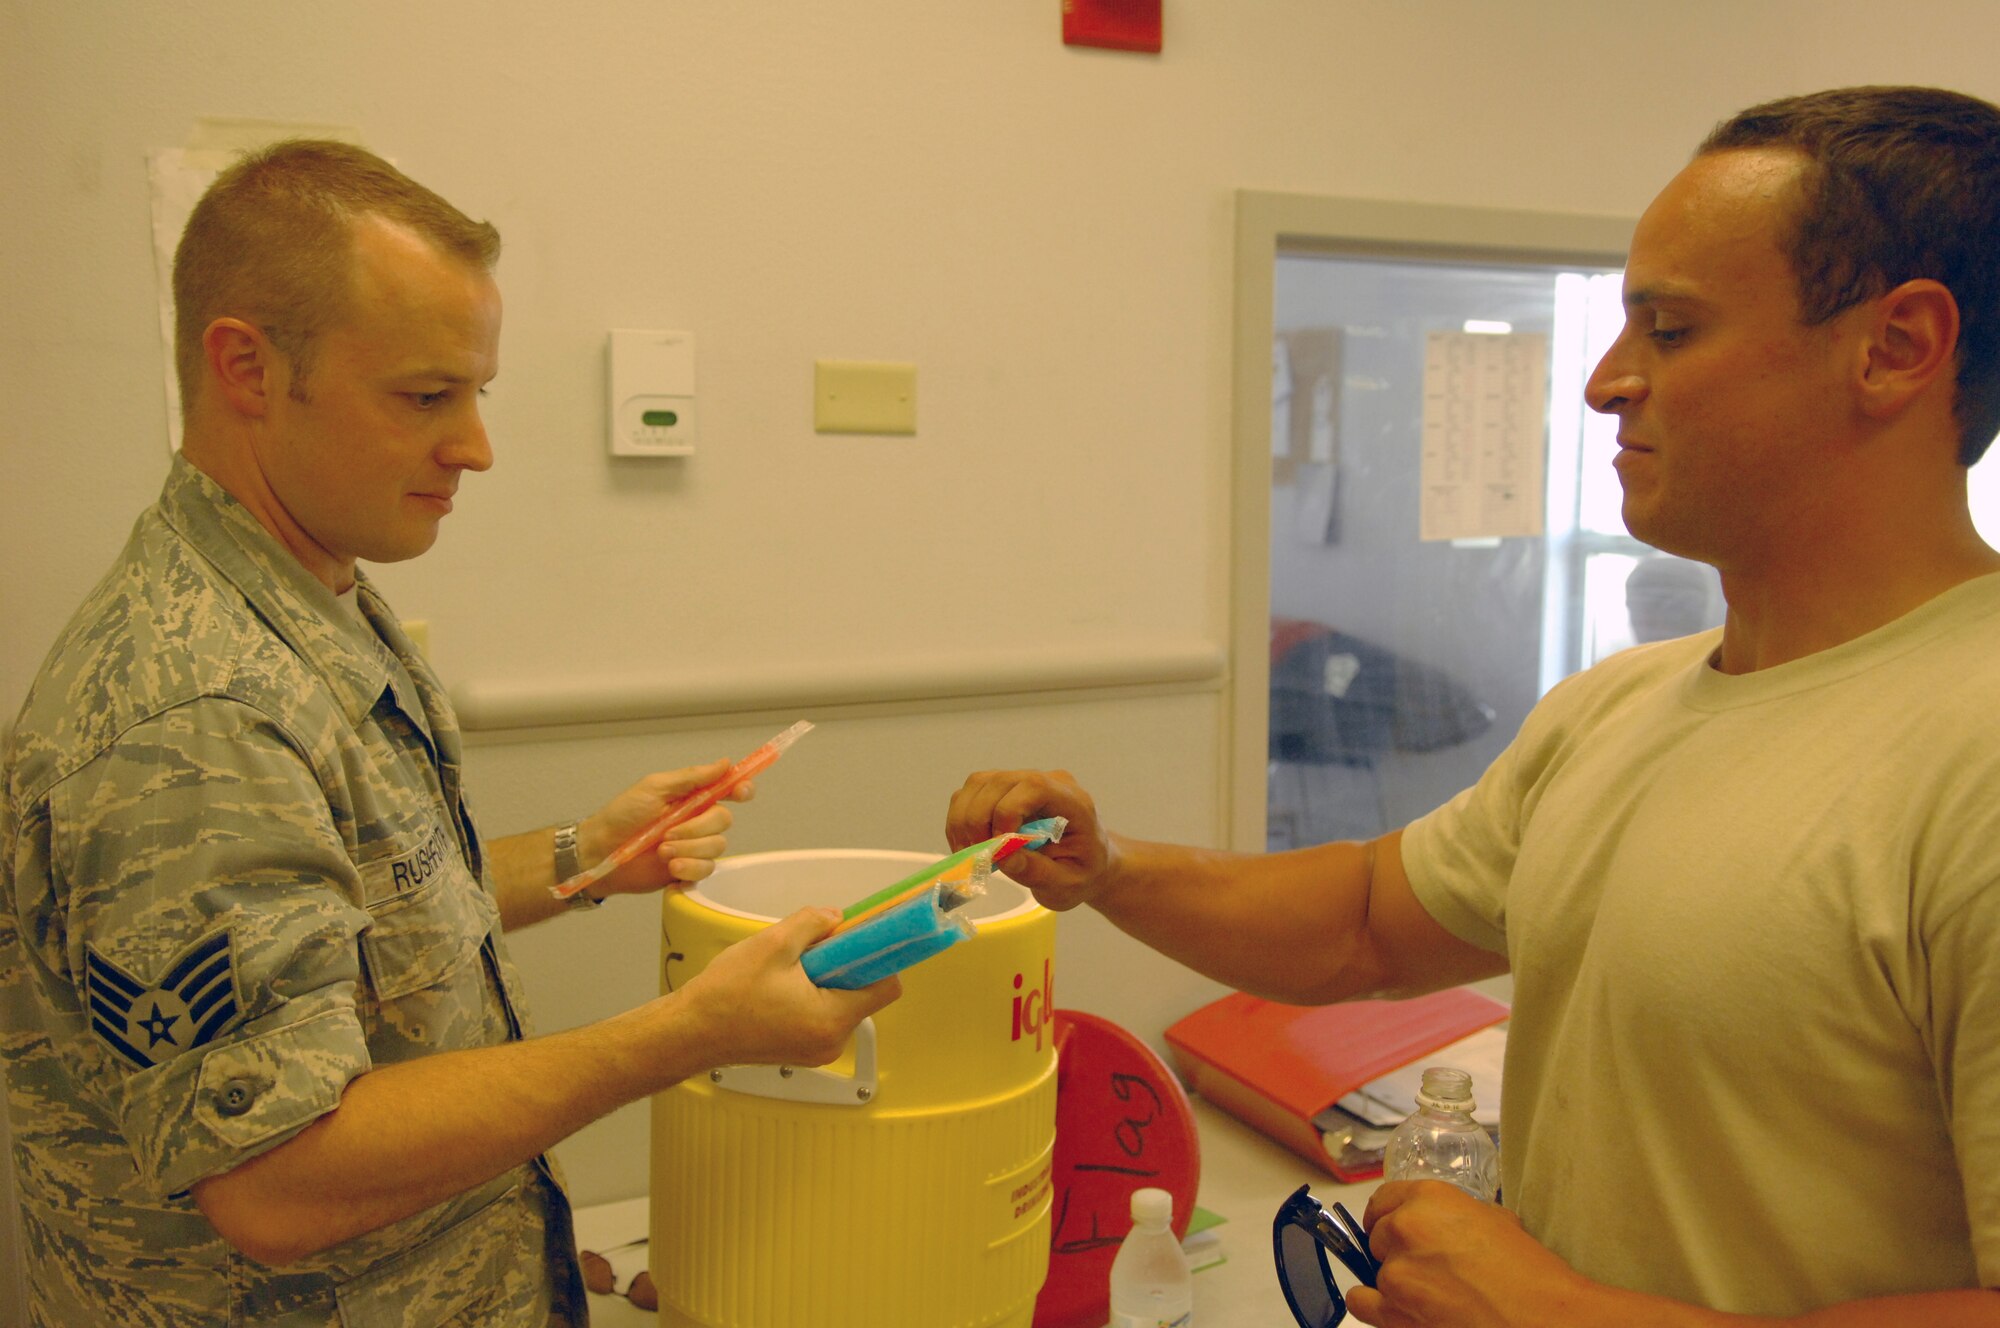 NELLIS AIR FORCE BASE, Nev. -- Staff Sgt. Shane Rushforth, 20th Fighter Wing and Air Expeditionary Wing chaplain assistant, hands a popsicle to Airman 1st Class Taylor Woods, 77th Aircraft Maintenance Unit, for Red Flag 10-4 on July 27, 2010. The chaplain team went around to the various units here during Red Flag passing out drinks and popsicles and chatting with the troops to help boost morale. (U.S. Air Force photo by Airman 1st Class Daniel Phelps)